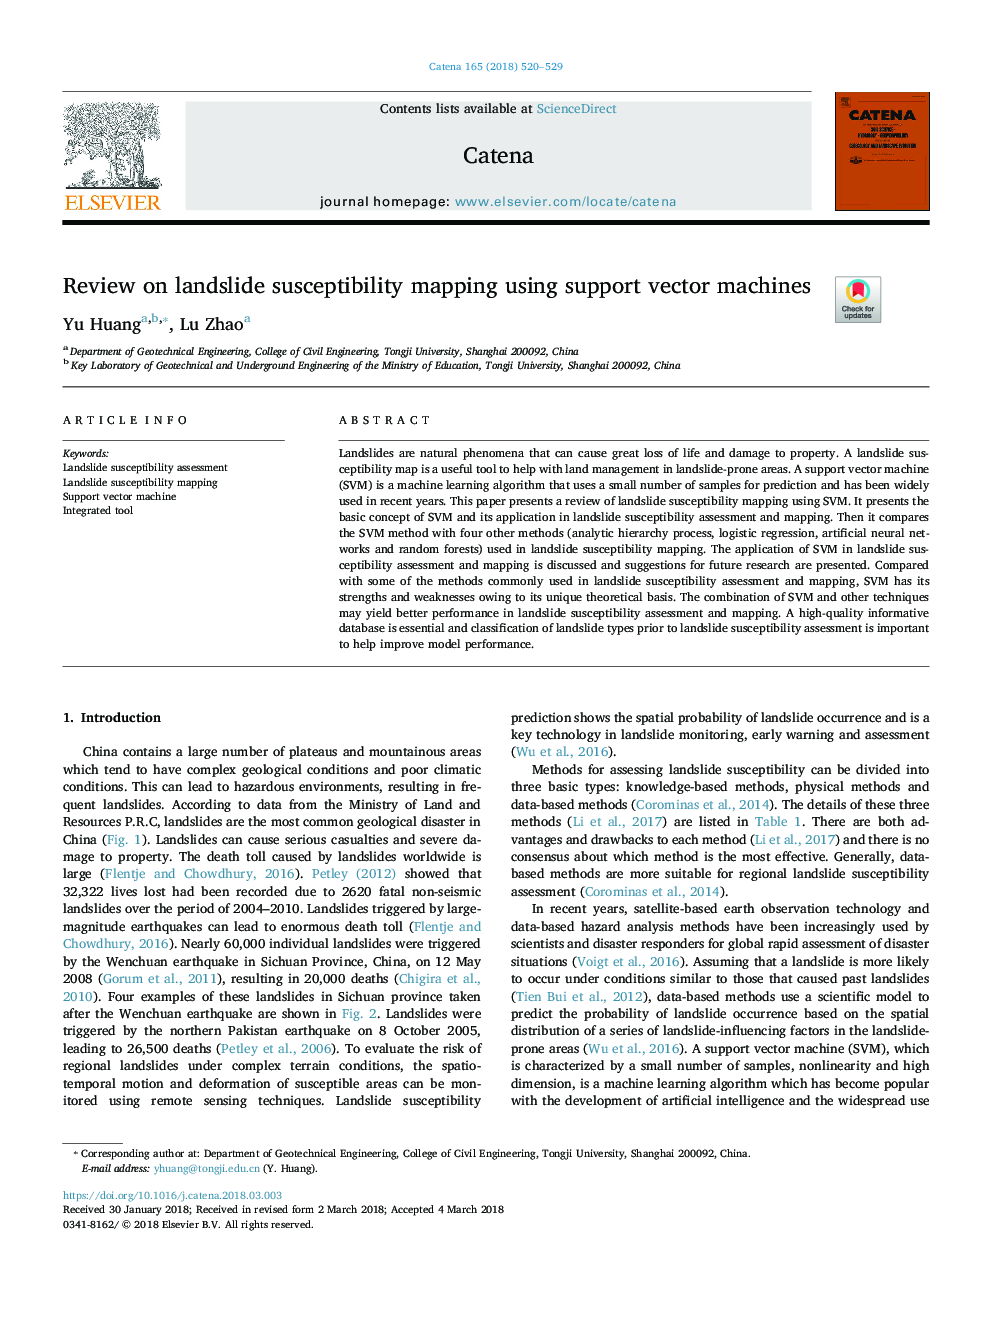 Review on landslide susceptibility mapping using support vector machines